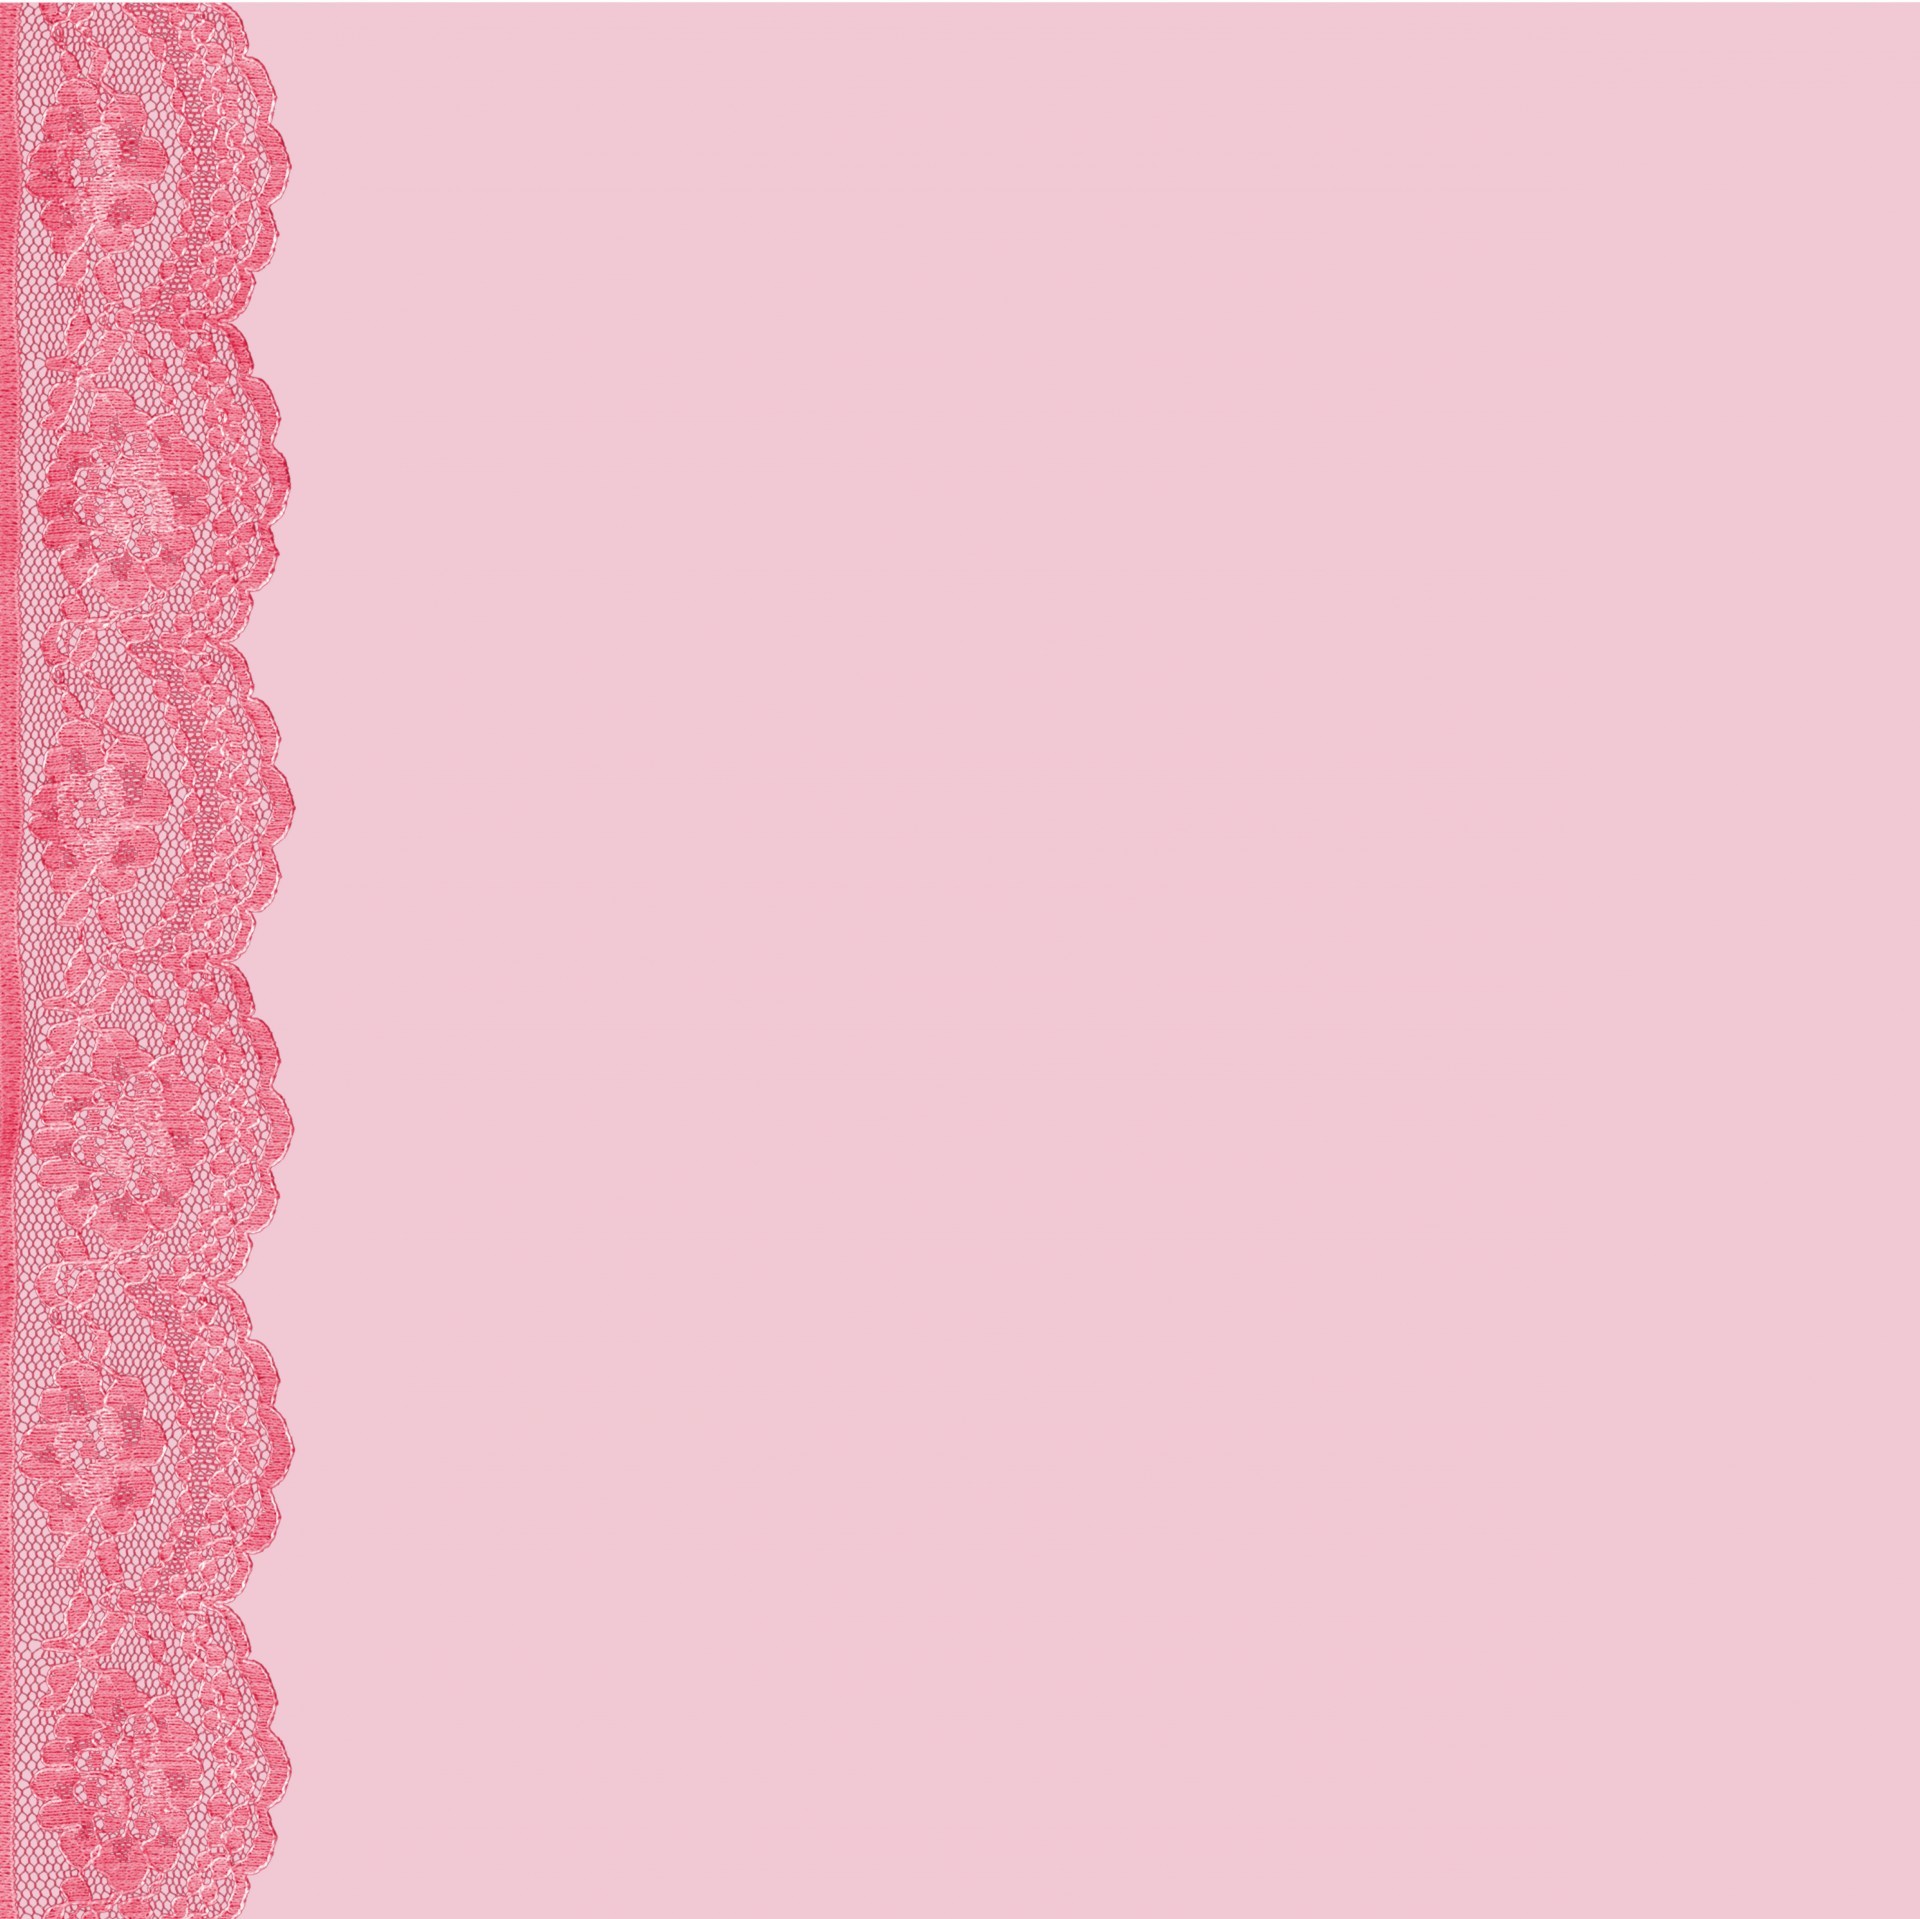 1920x1919 Pink Lace Background